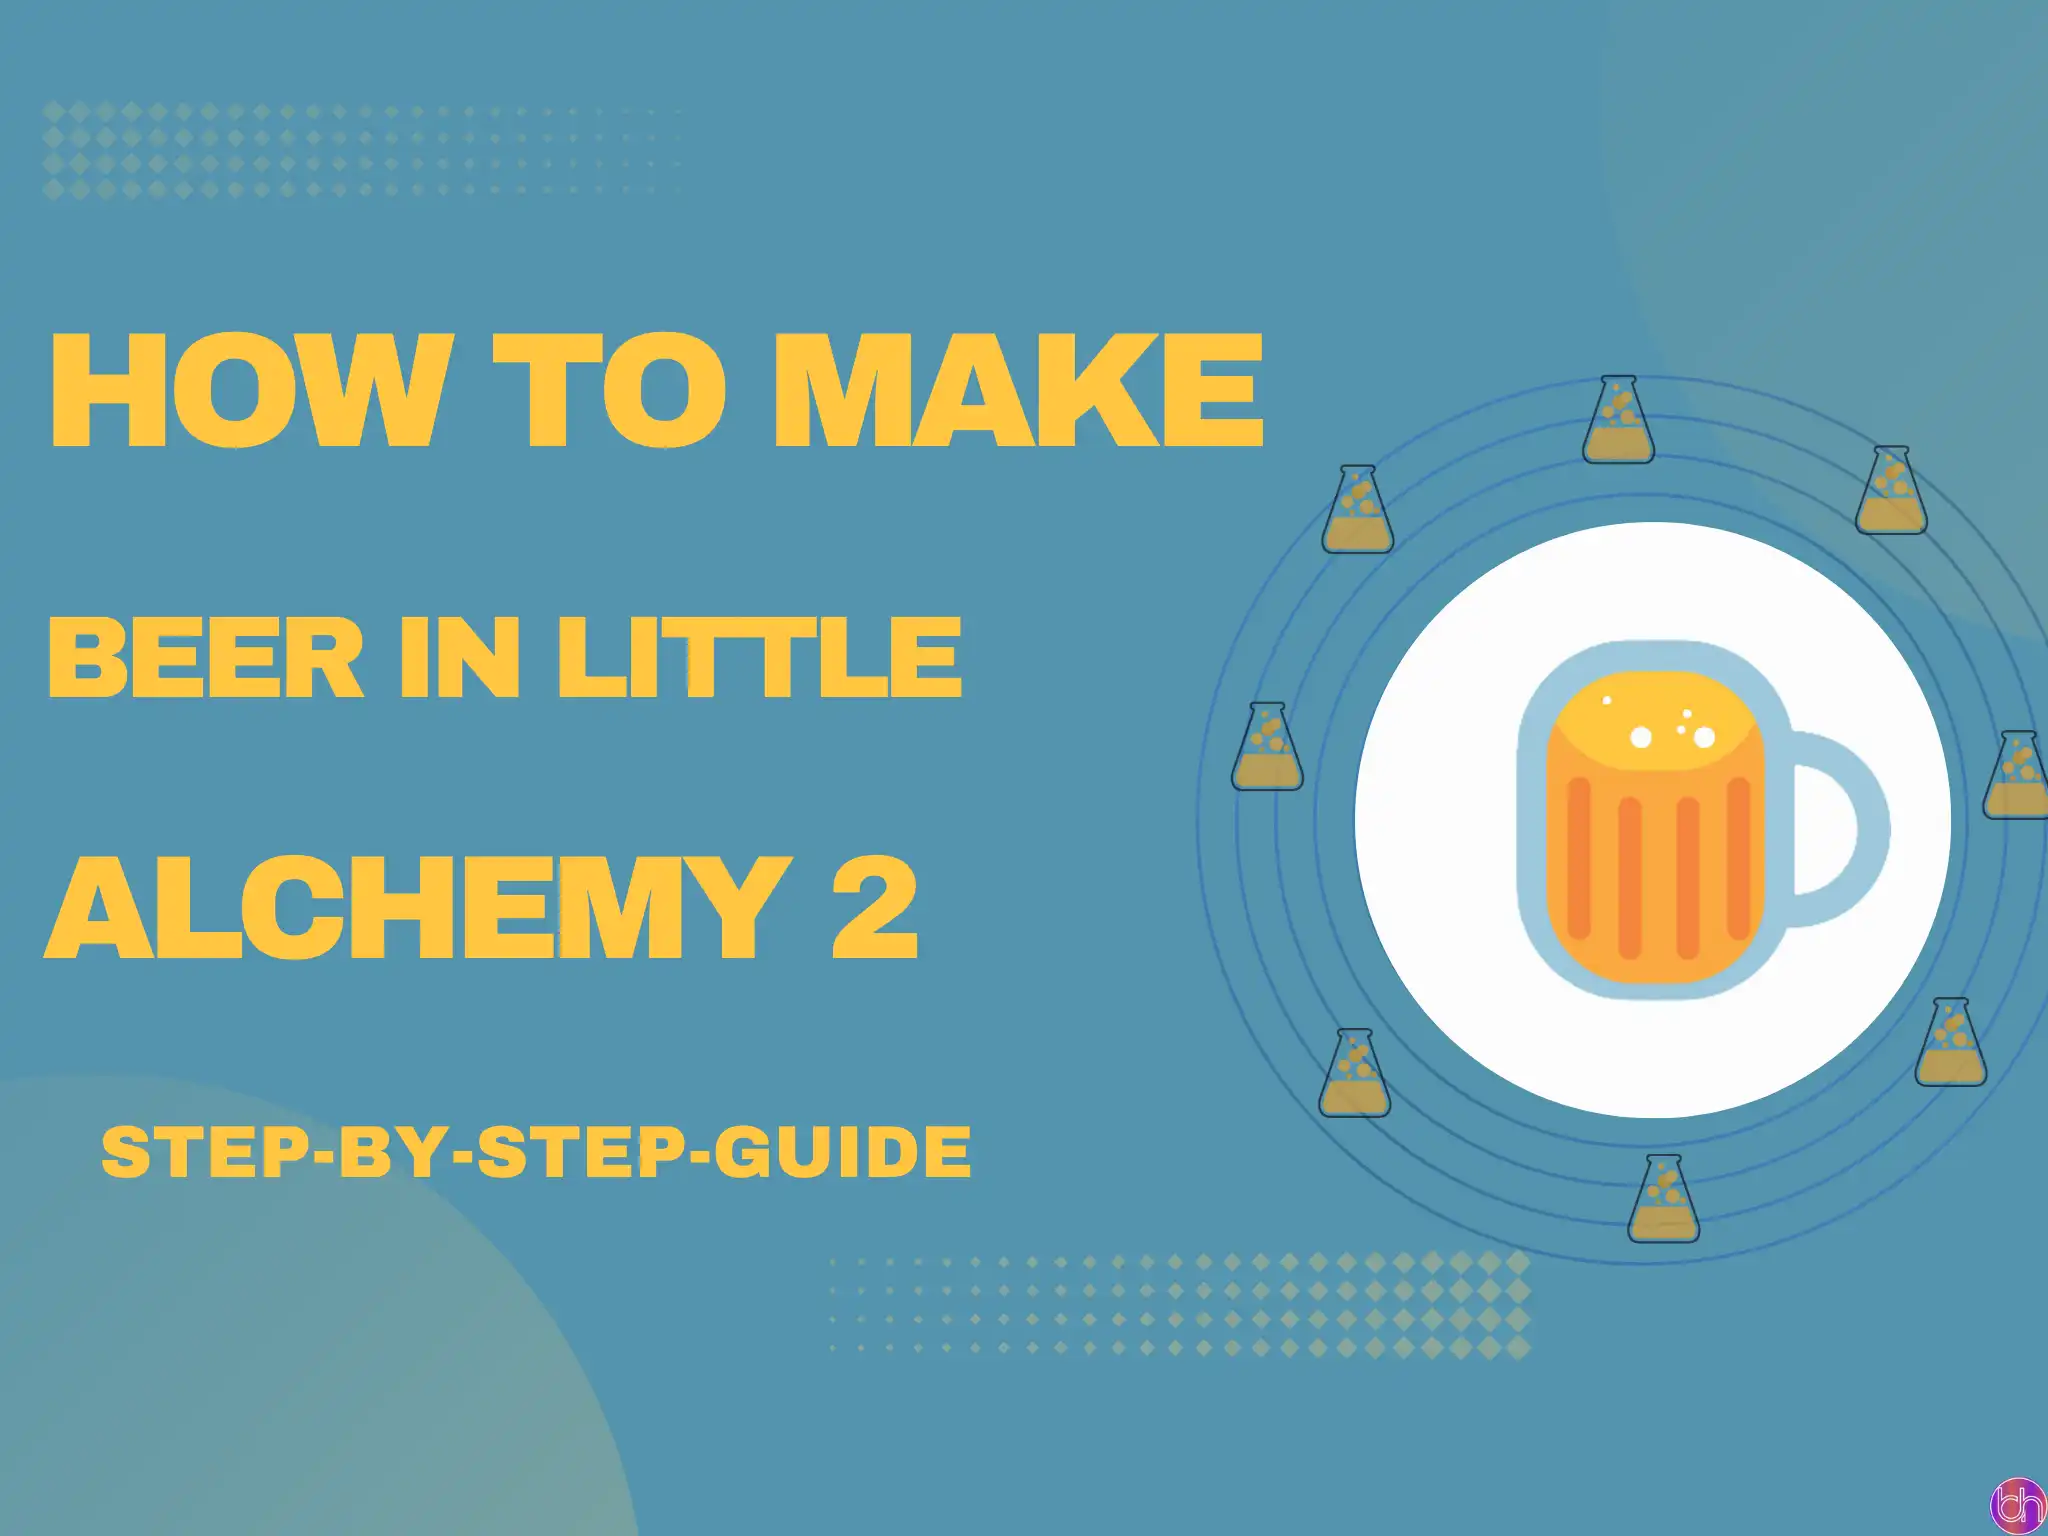 How to make Beer in Little Alchemy 2